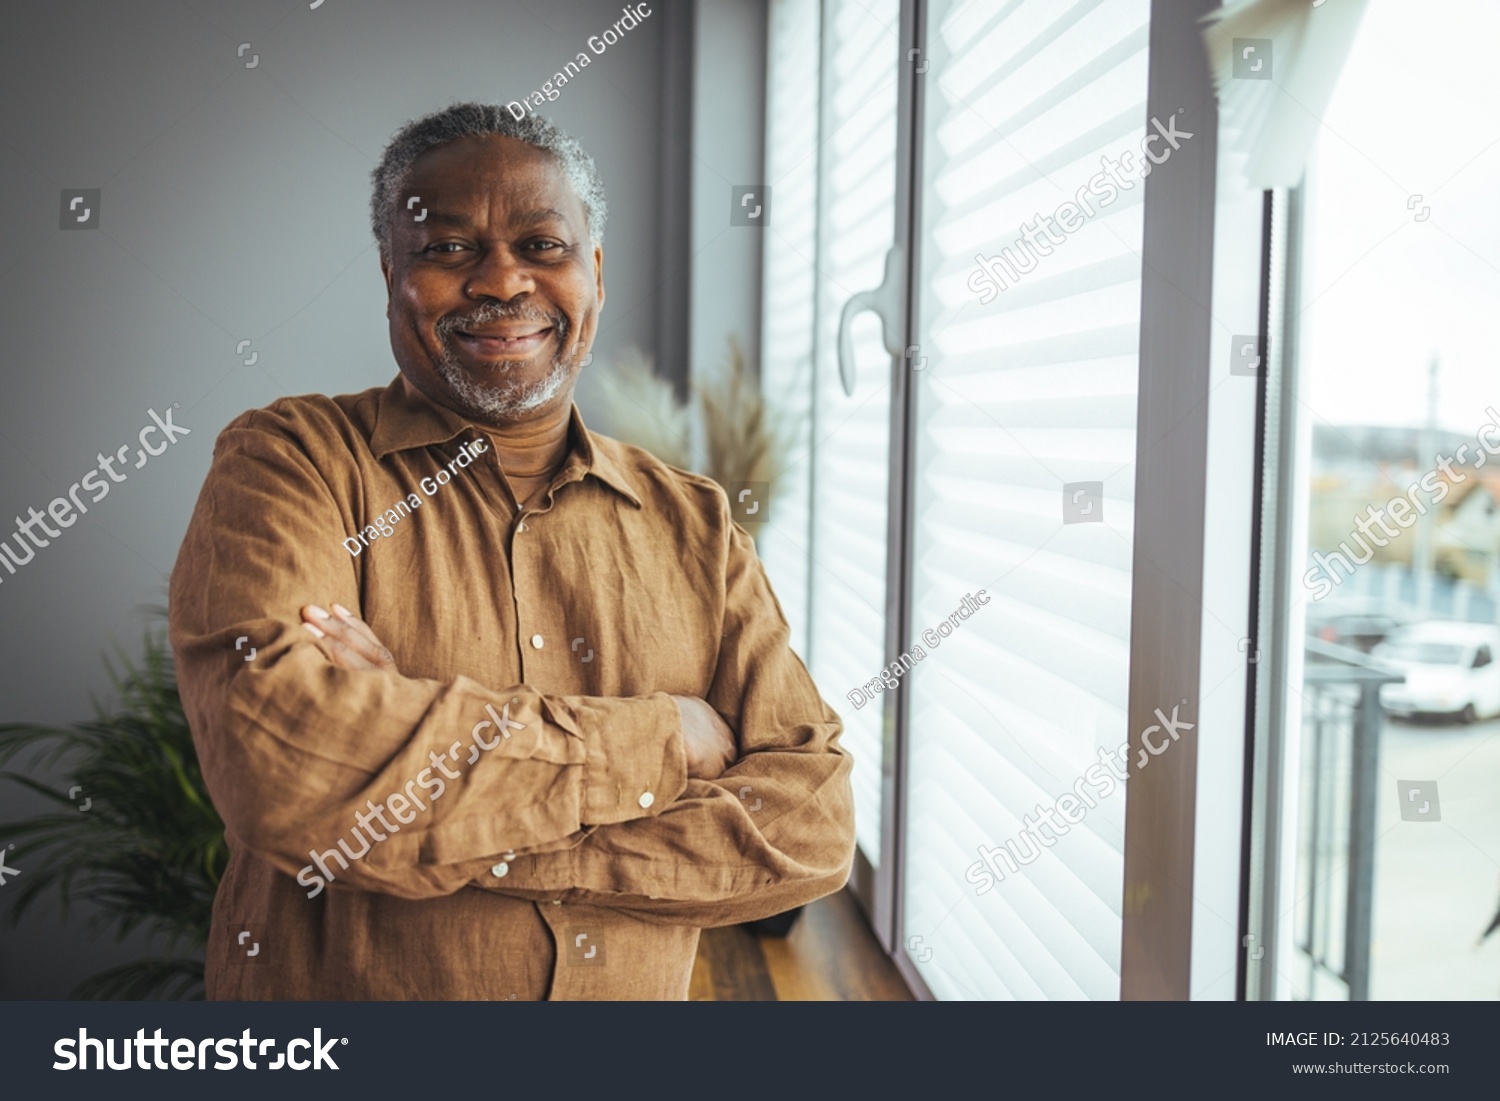 African American Senior Man at home Portrait. Smiling senior man looking at camera. Portrait of black confident man at home. Portrait of a senior man standing against a grey background #2125640483